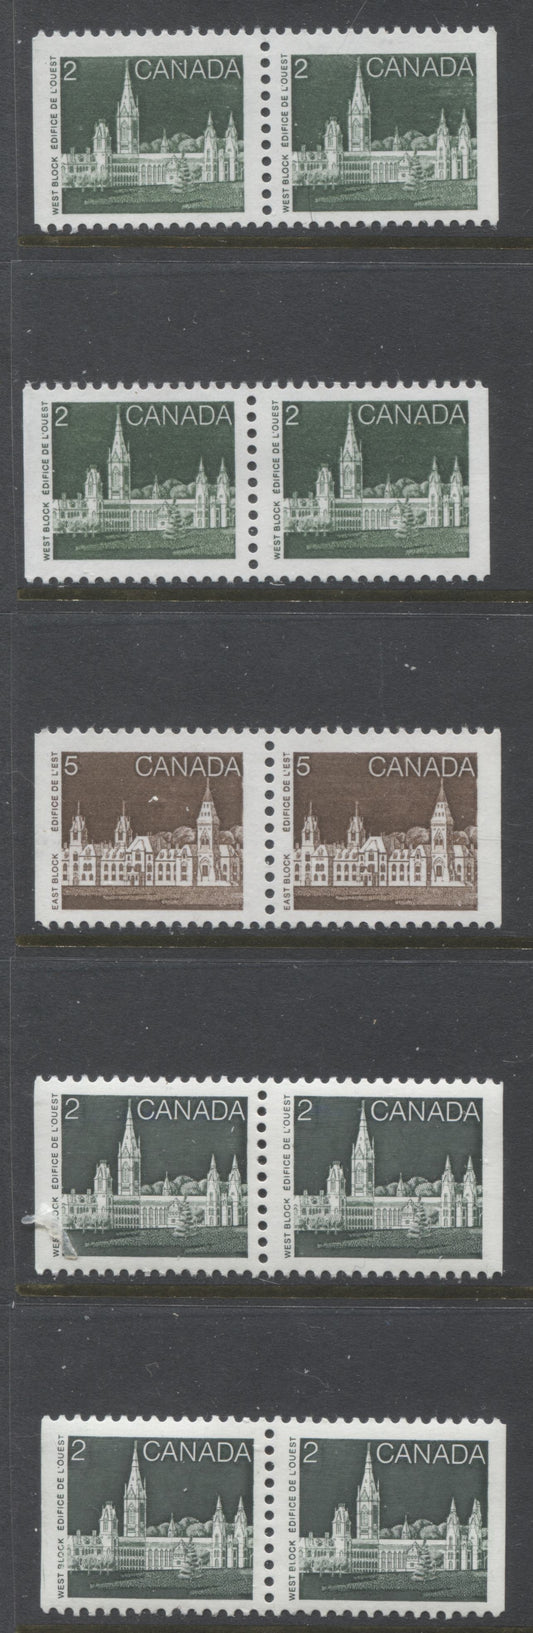 Lot 381 Canada #939i. 939a, 939ai, 941i 2c, 5c Deep Green & Deep Brown Parliament Buildings, 1982-1987 Artifacts & National Parks Issue, 5 VFNH Booklet Pairs, NF/NF to LF/LF, Rolland & Harrison Papers